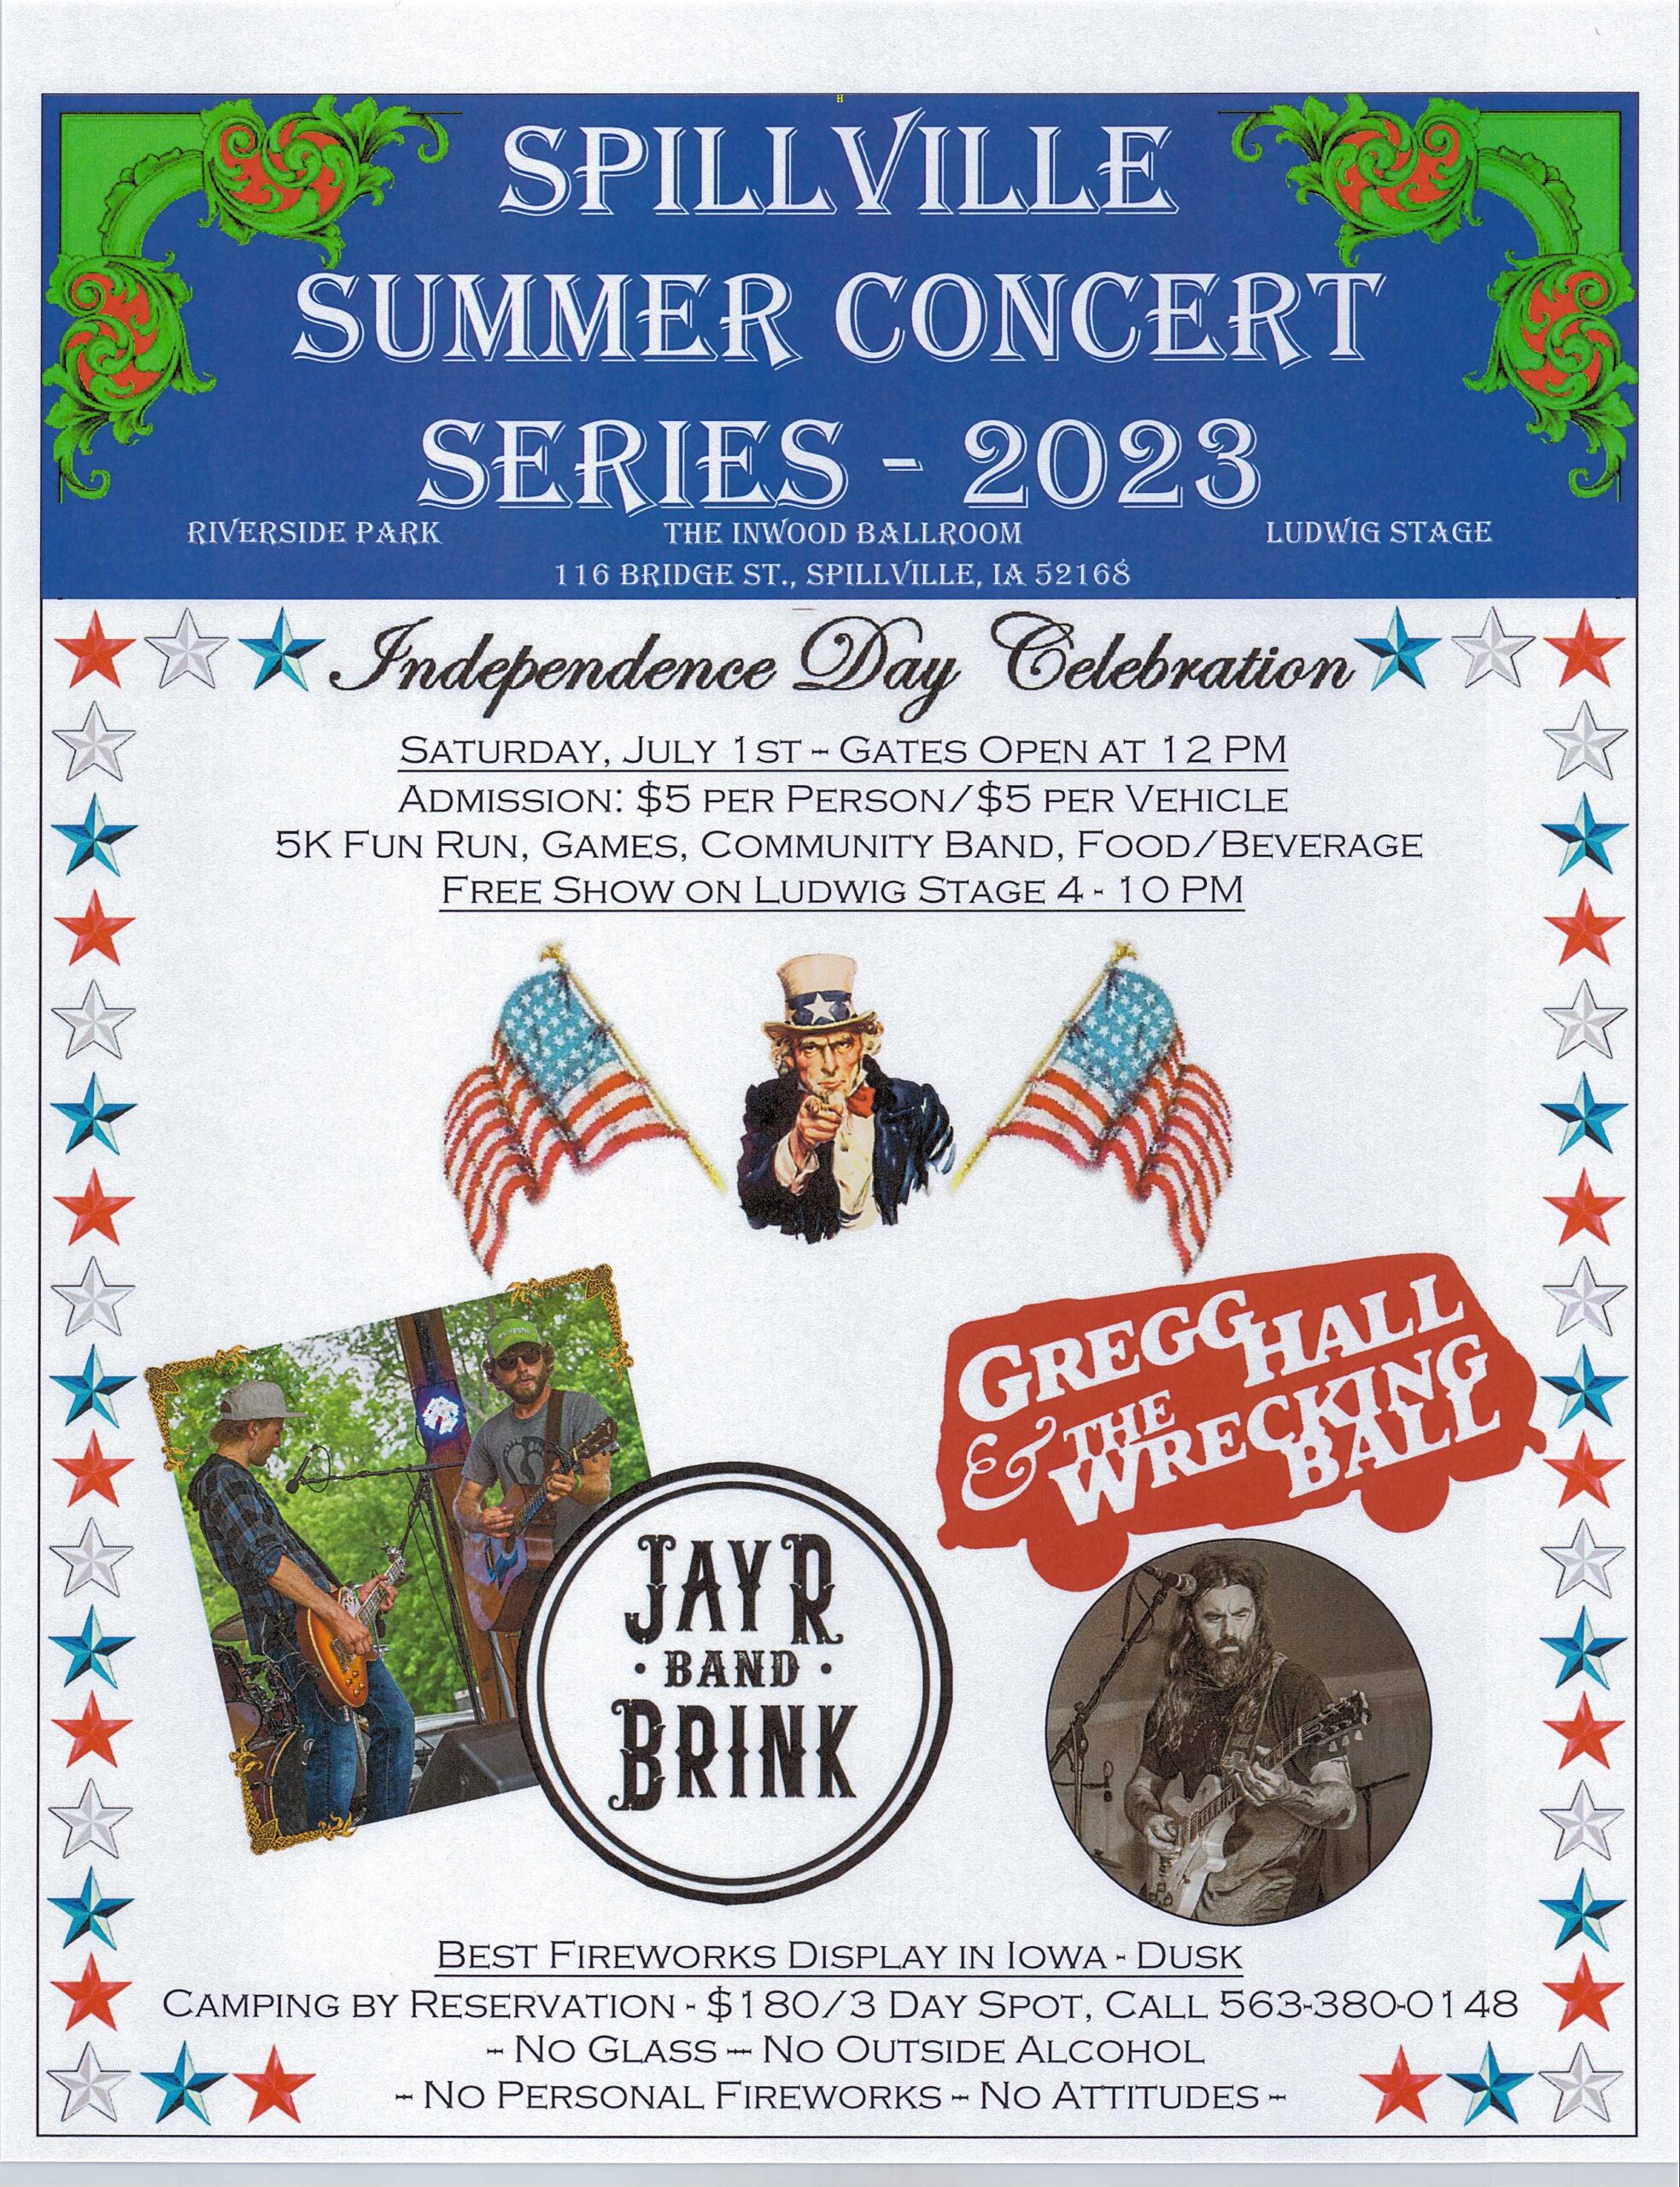 Spillville Independence Day Celebration/Summer Concert Series - JR Brink Band with Gregg Hall & the Wrecking Ball thumbnail